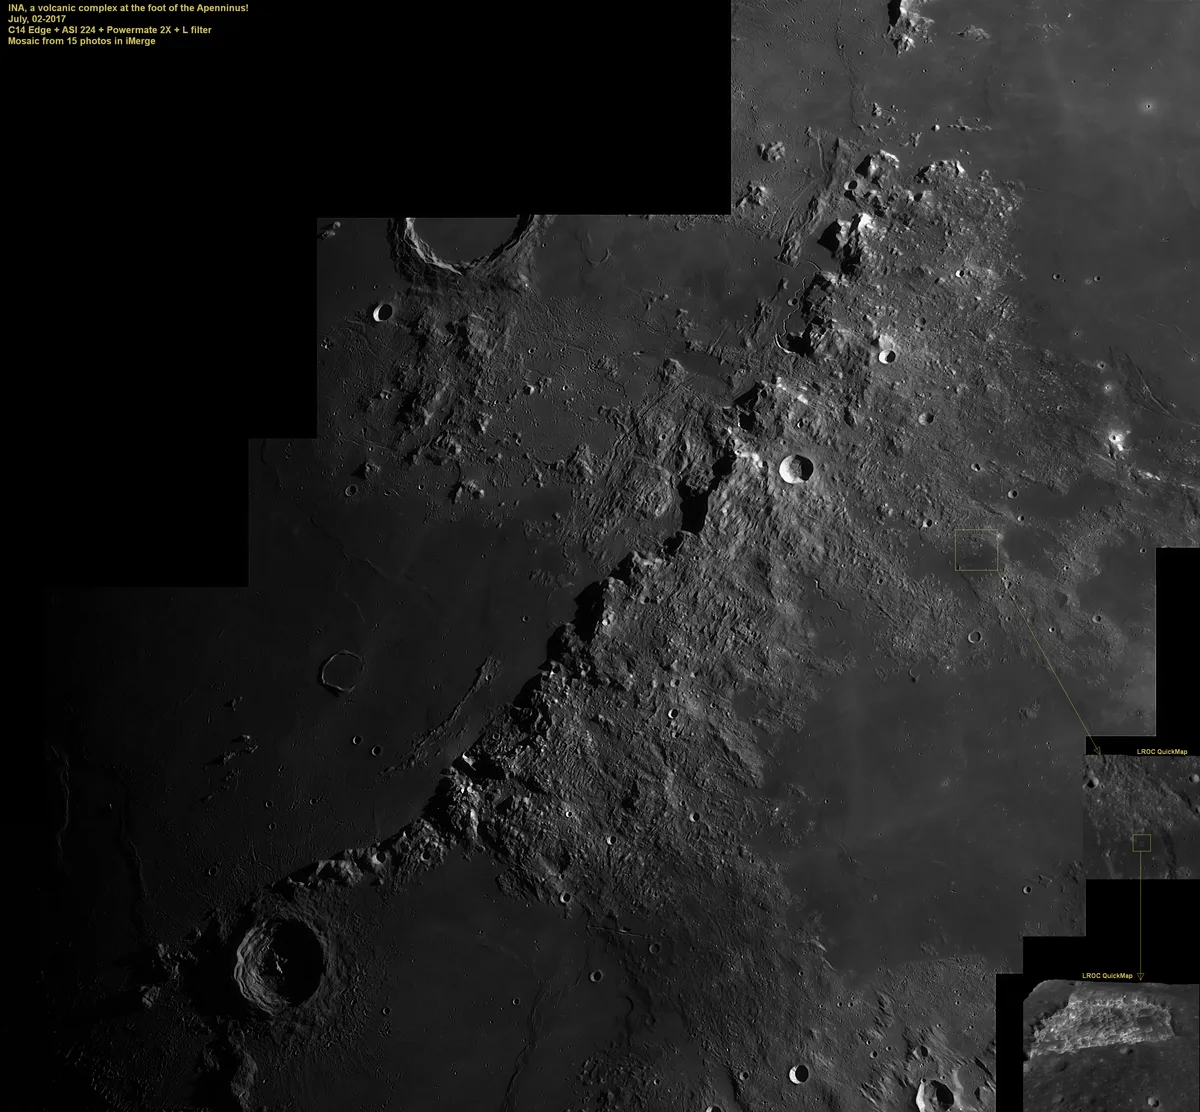 INA, a volcanic complex at the foot of the Apenninus! by Avani Soares, Parsec Observatory, Canoas, Brazil. Equipment: C14 Edge, ASI 224, Powermate 2X, L filter